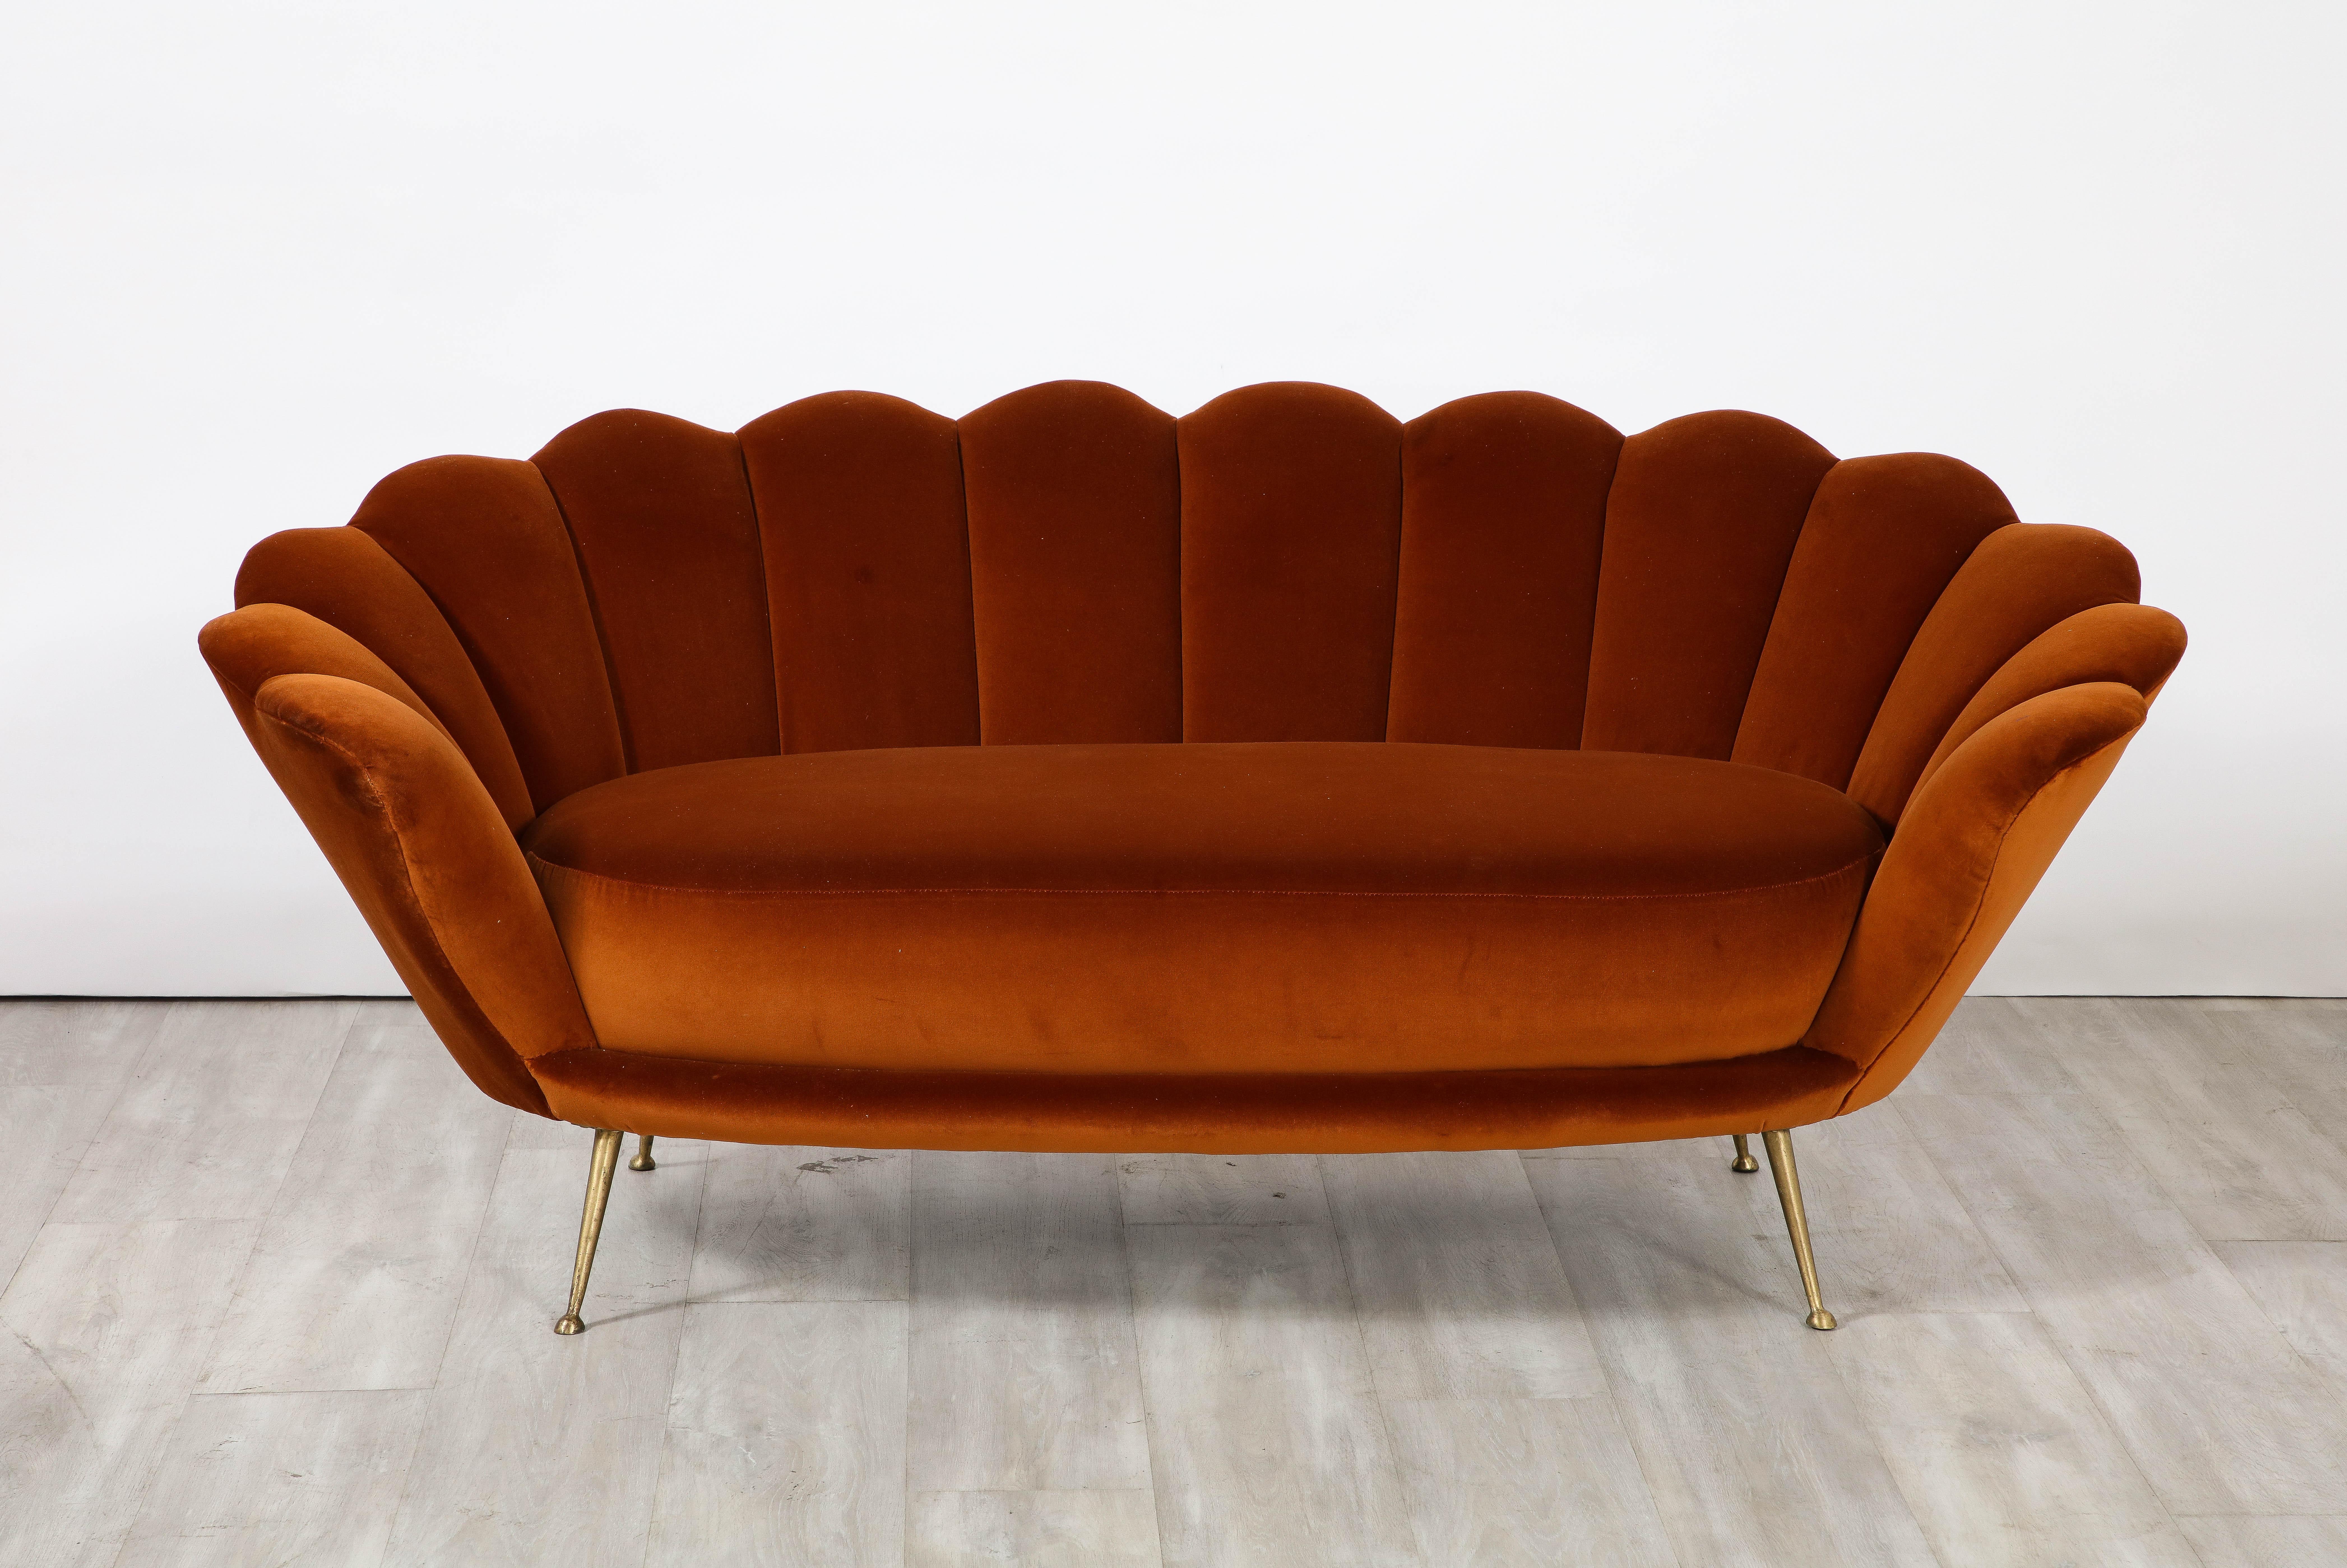 A decadently designed Italian 1950's settee with a scalloped or petal shaped form and luxuriously upholstered channeled back tufting. The settee has been fully restored and newly reupholstered in a rich apricot colored cotton European velvet. The